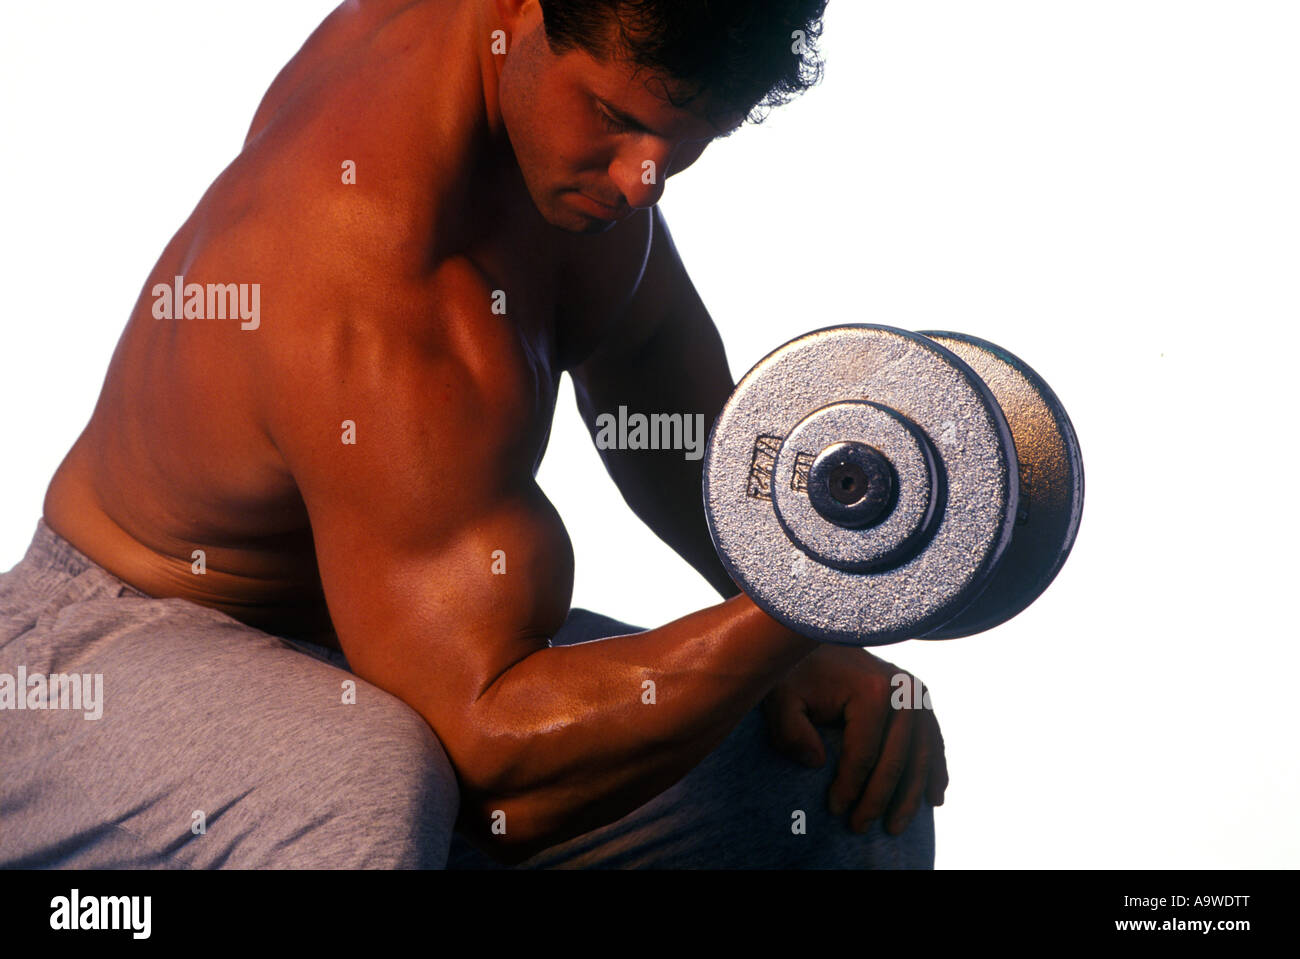 GYM MALE WEIGHT LIFTER FLEXES ARM MUSCLES LIFTING WEIGHTS Stock Photo